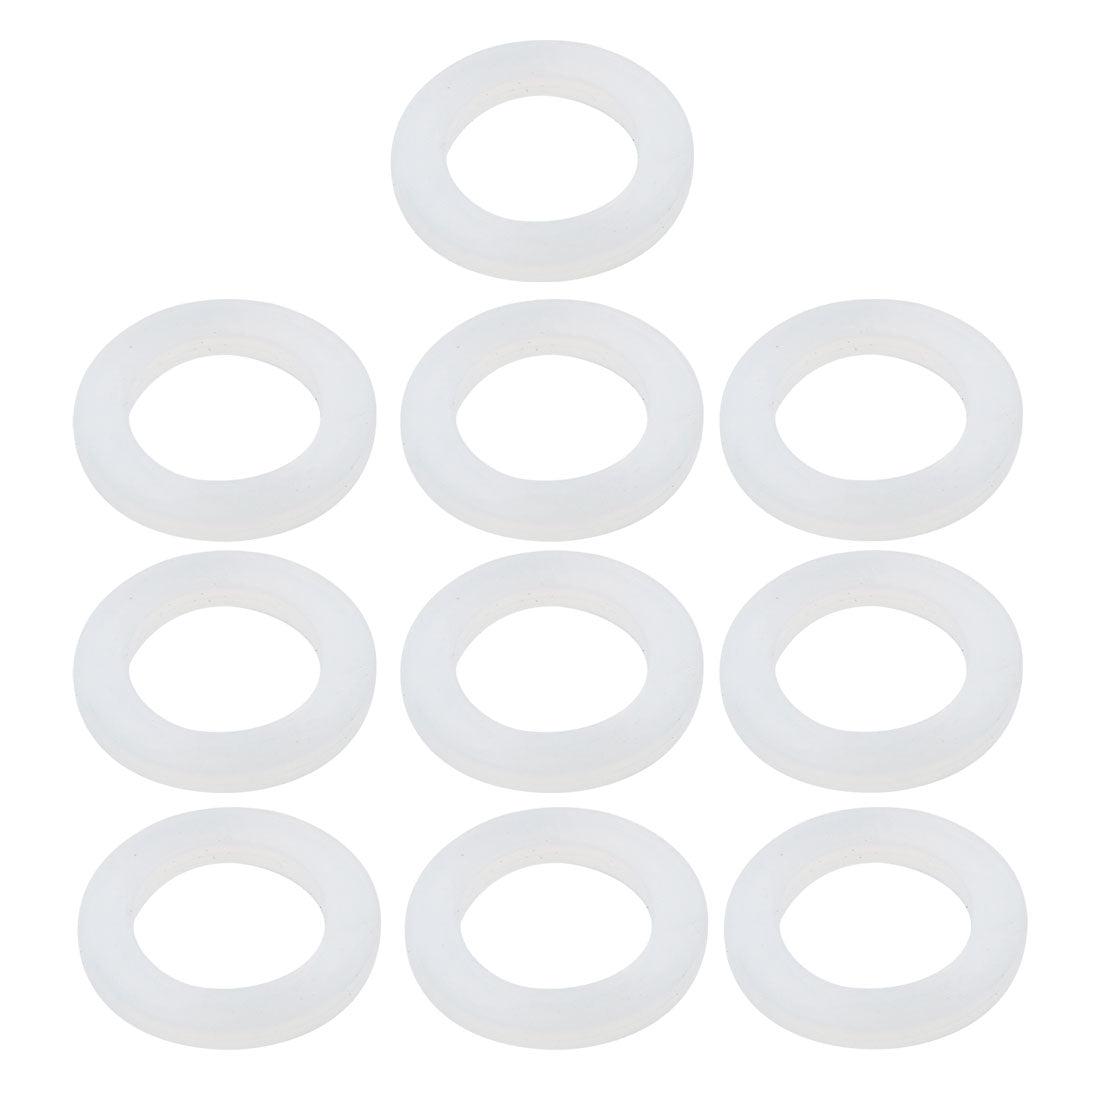 Uxcell Uxcell 10pcs White Silicone Round Flat Washer Assortment Size 19x31x3mm Flat Washer